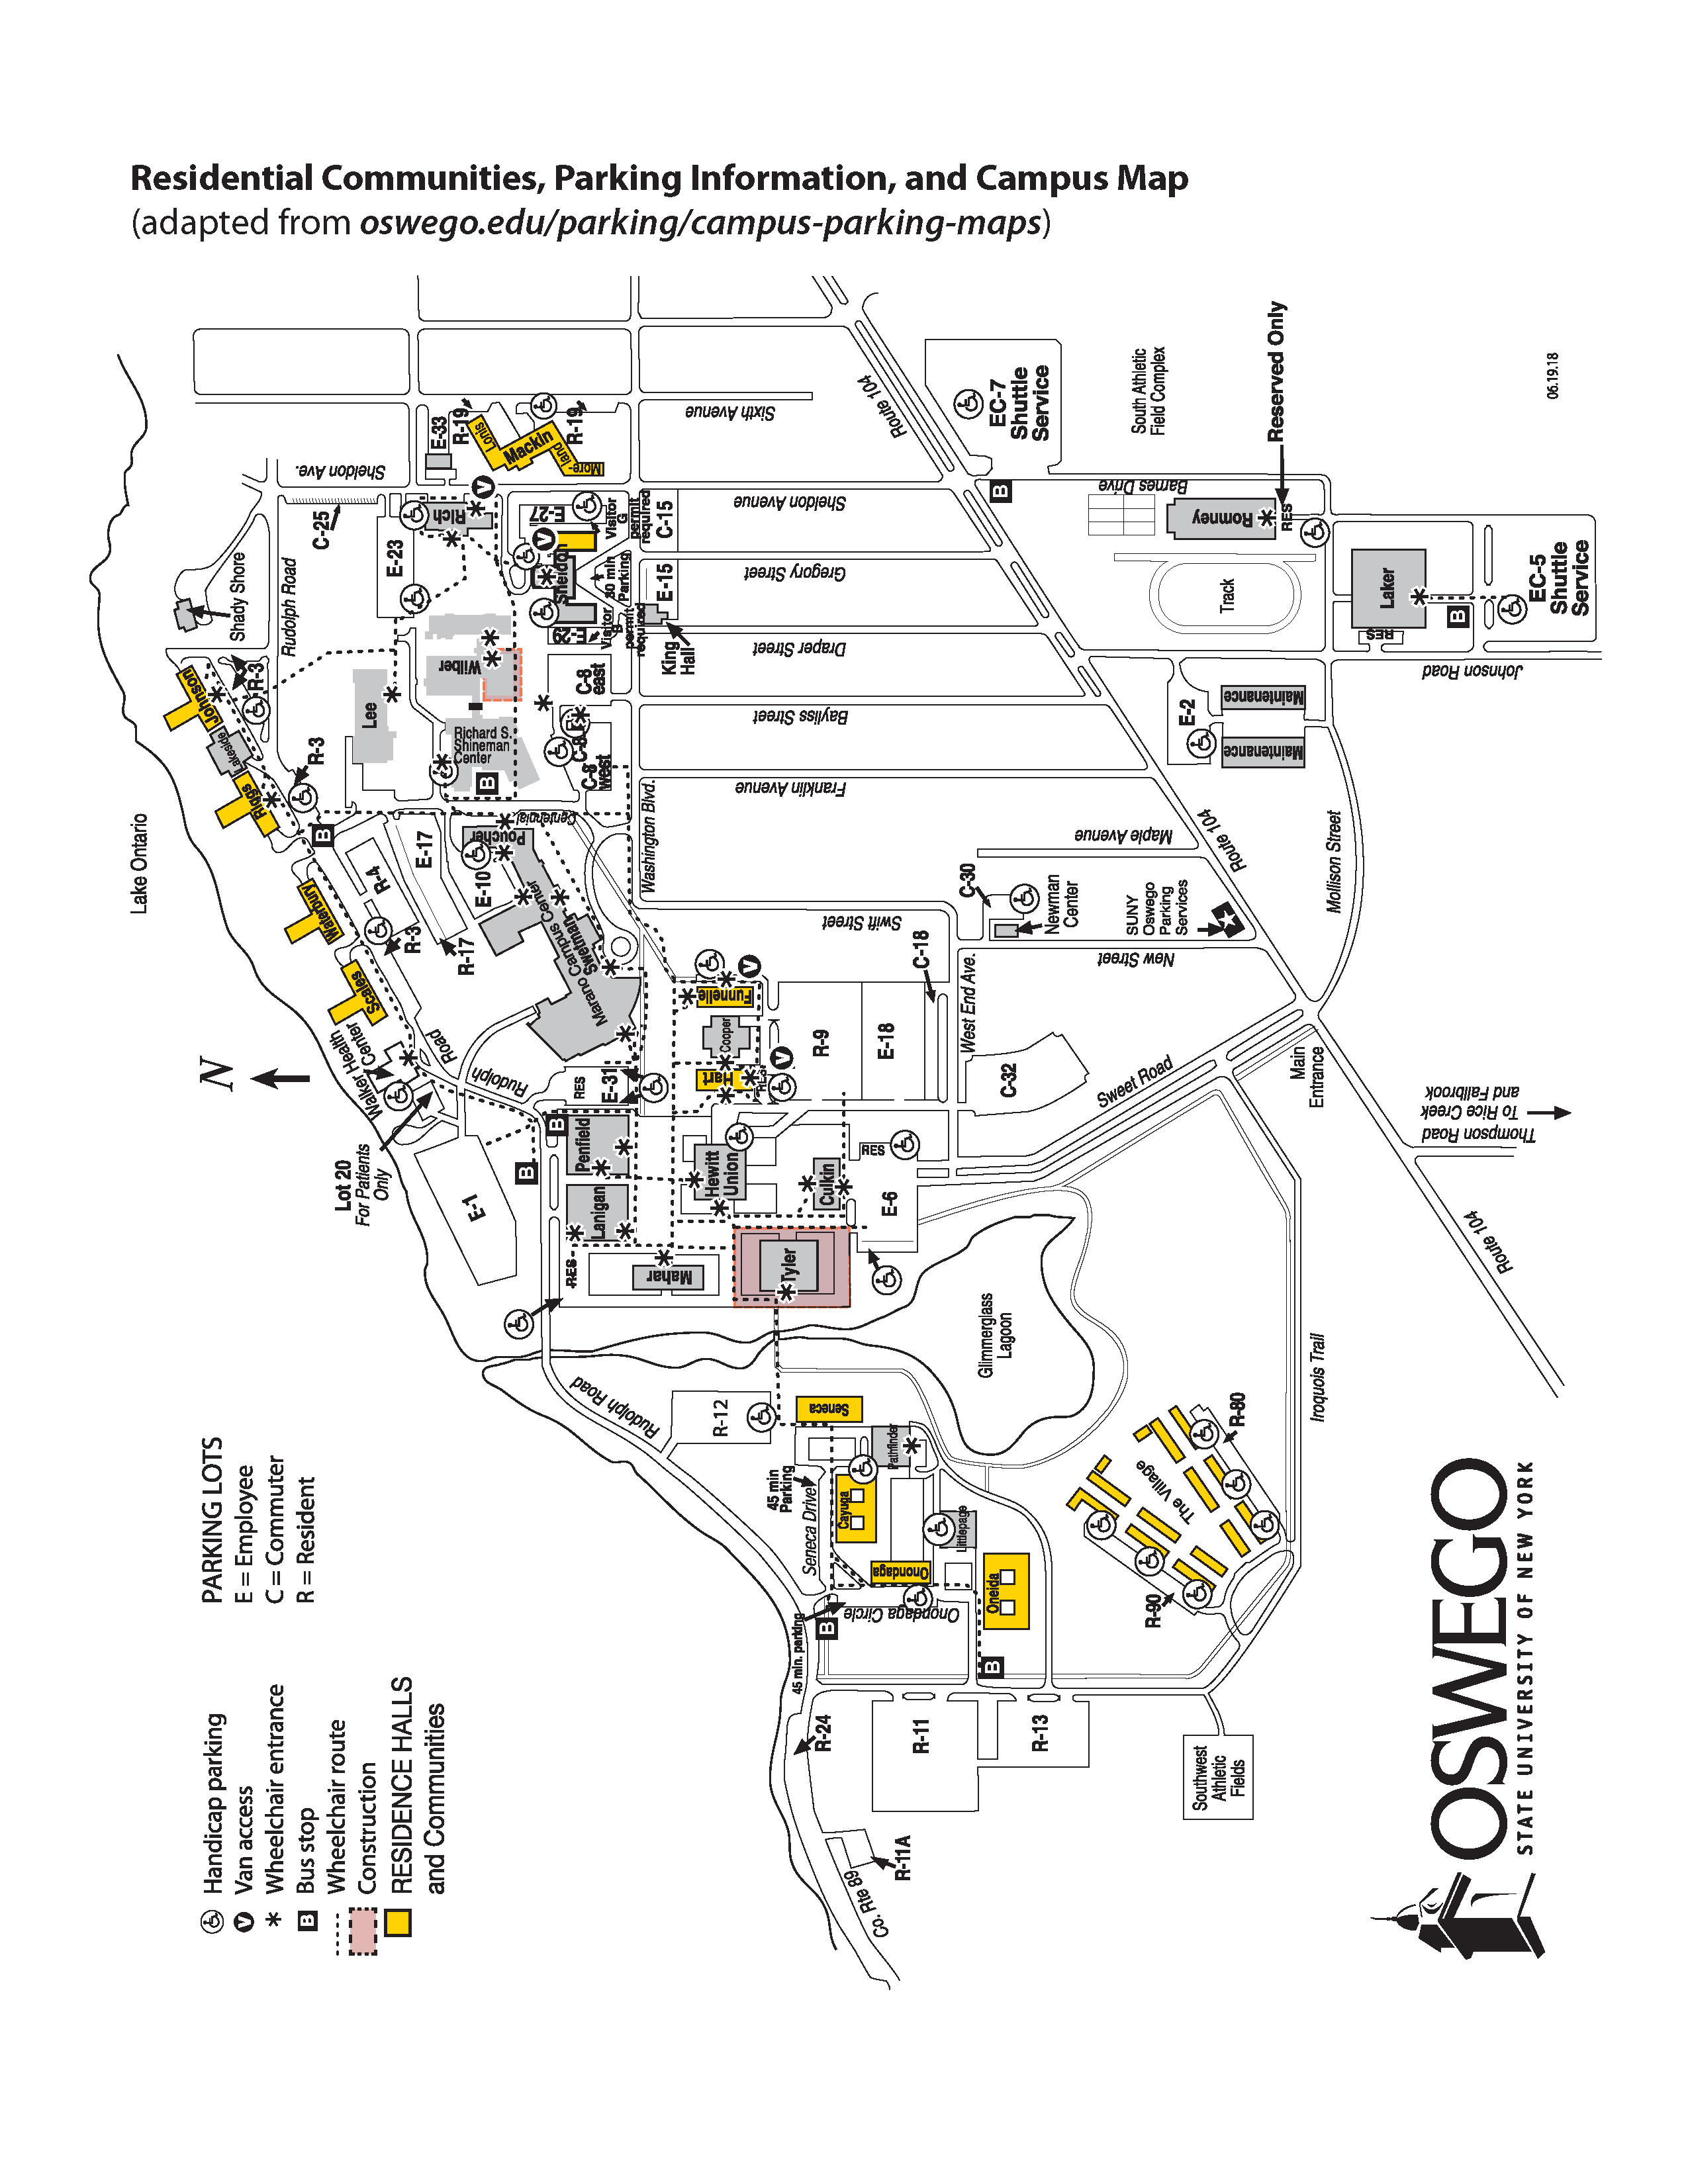 Residential Communities, Parking Information, and Campus Map (adapted from oswego.edu/parking/campus-parking-maps)